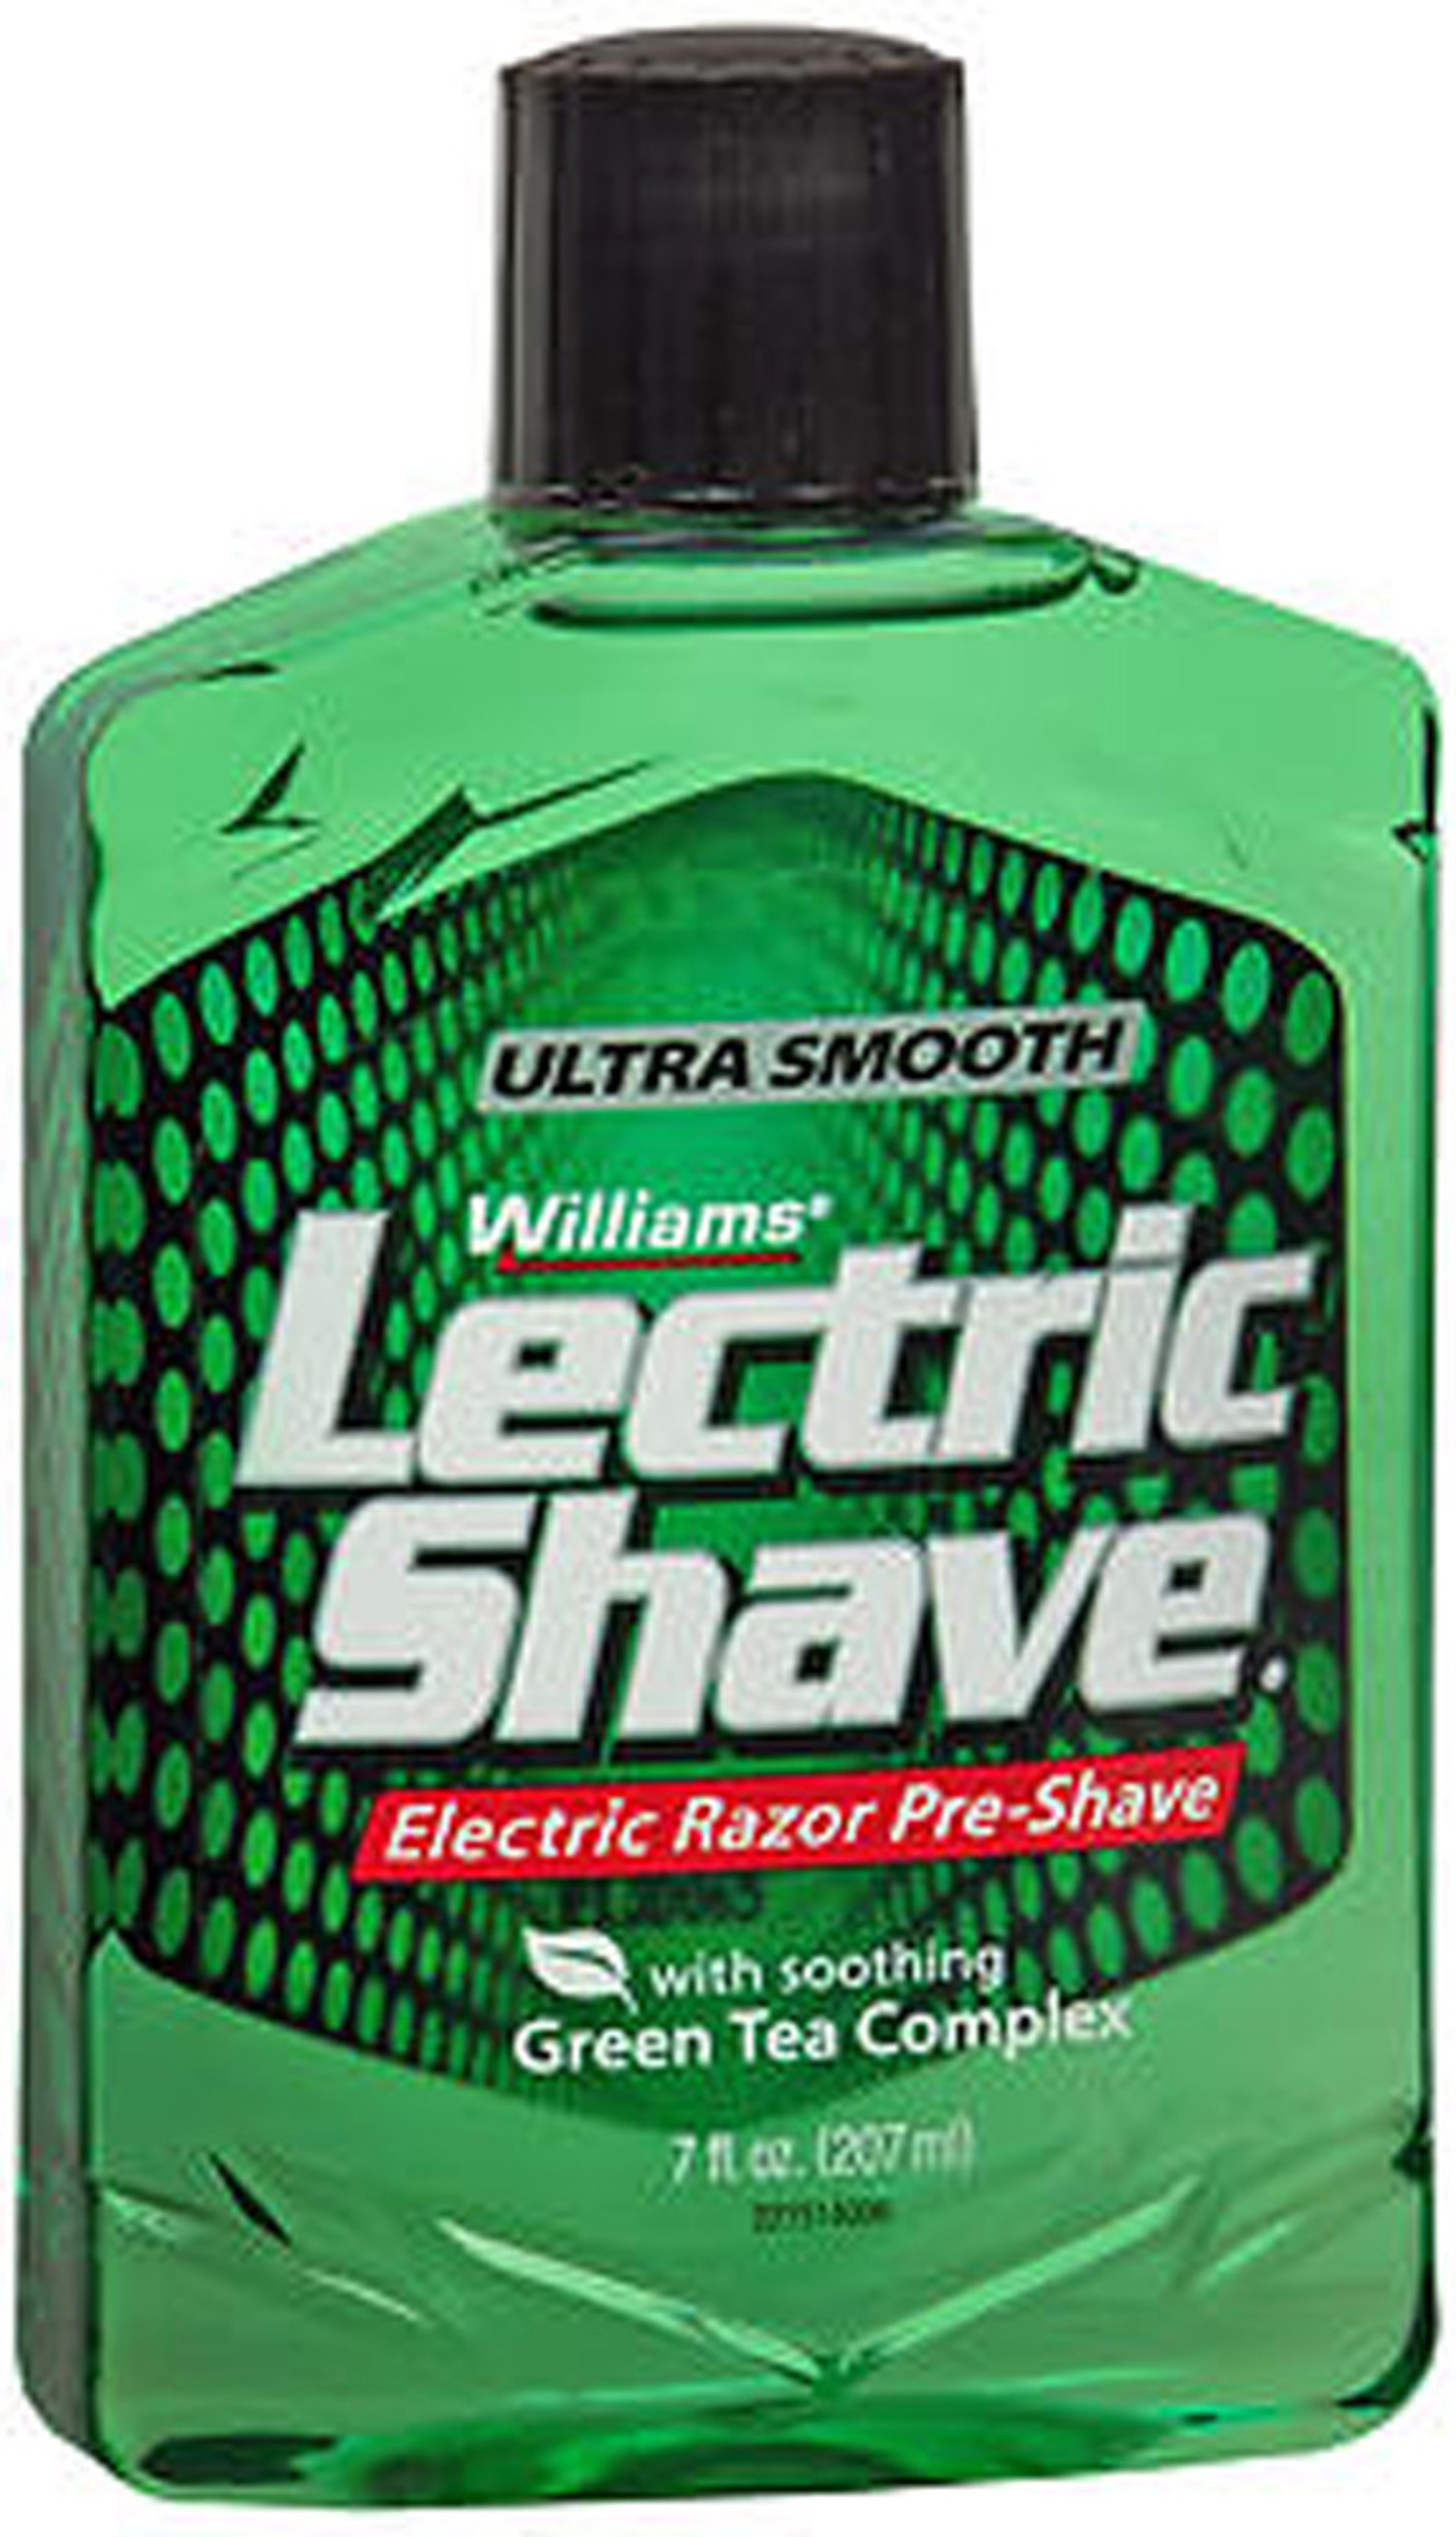 ultra shave